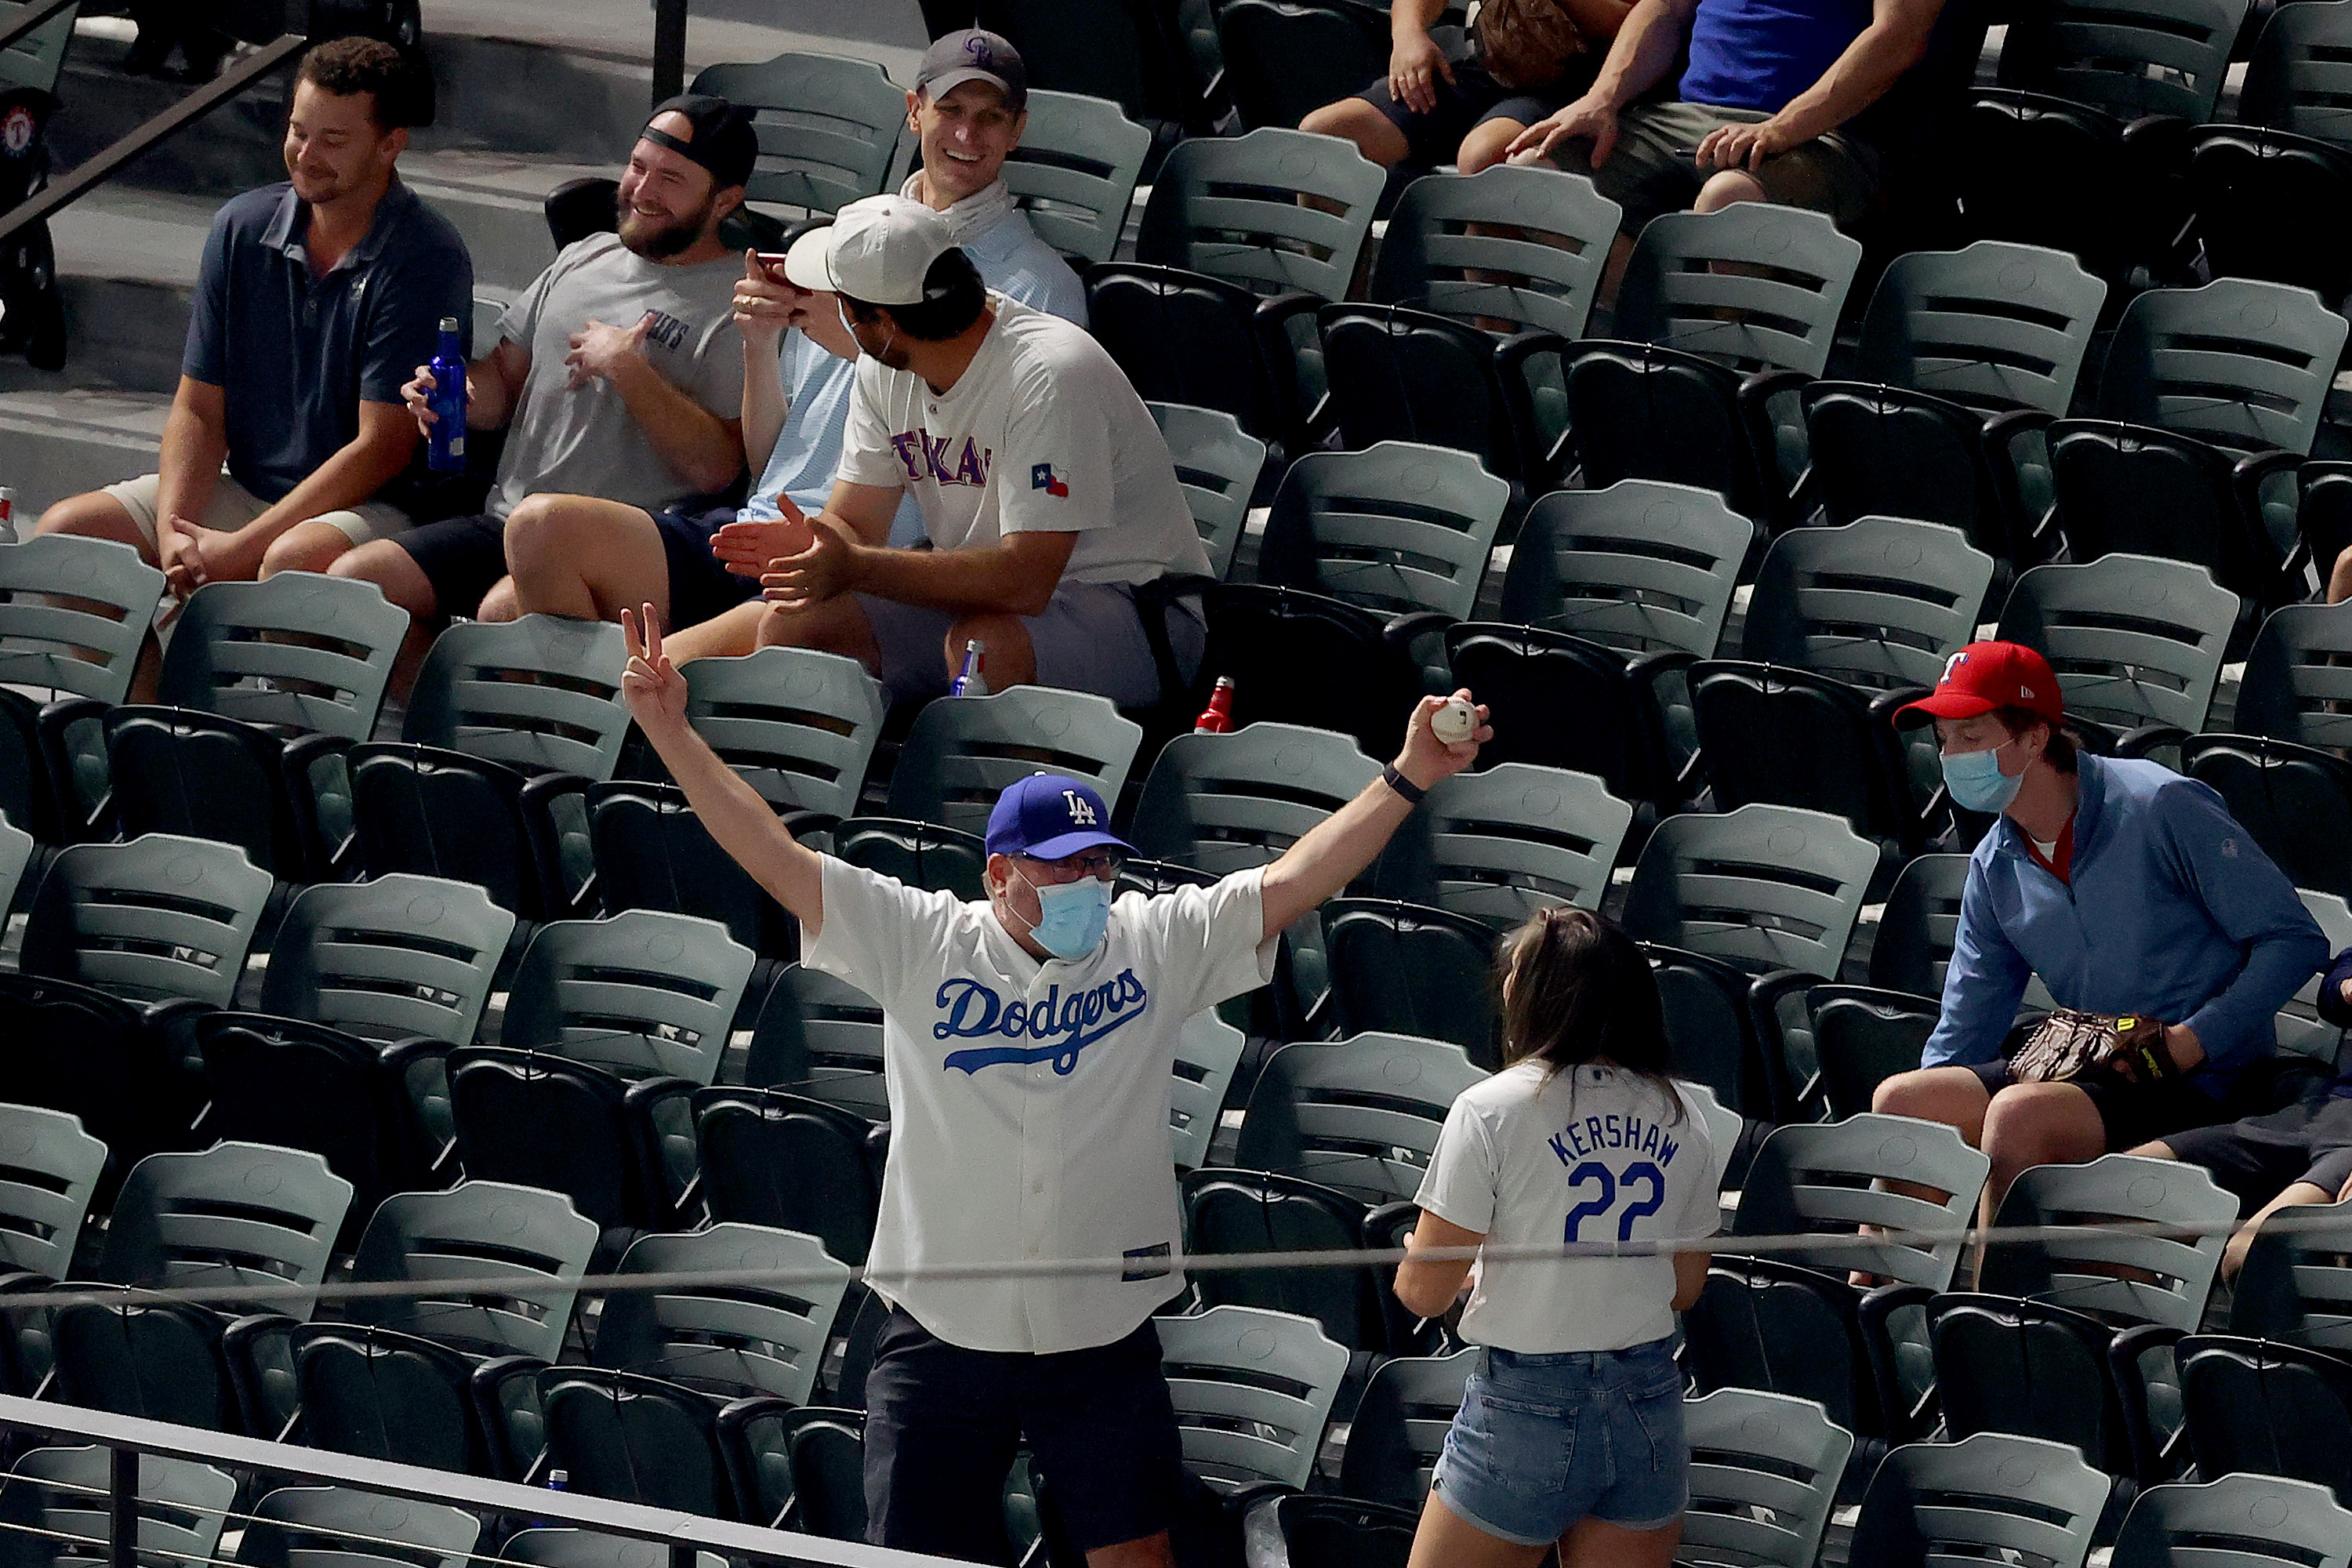 WATCH: Dodgers Fans Are Running Over A Clayton Kershaw Jersey With Their  Cars After Losing NLDS To Nationals